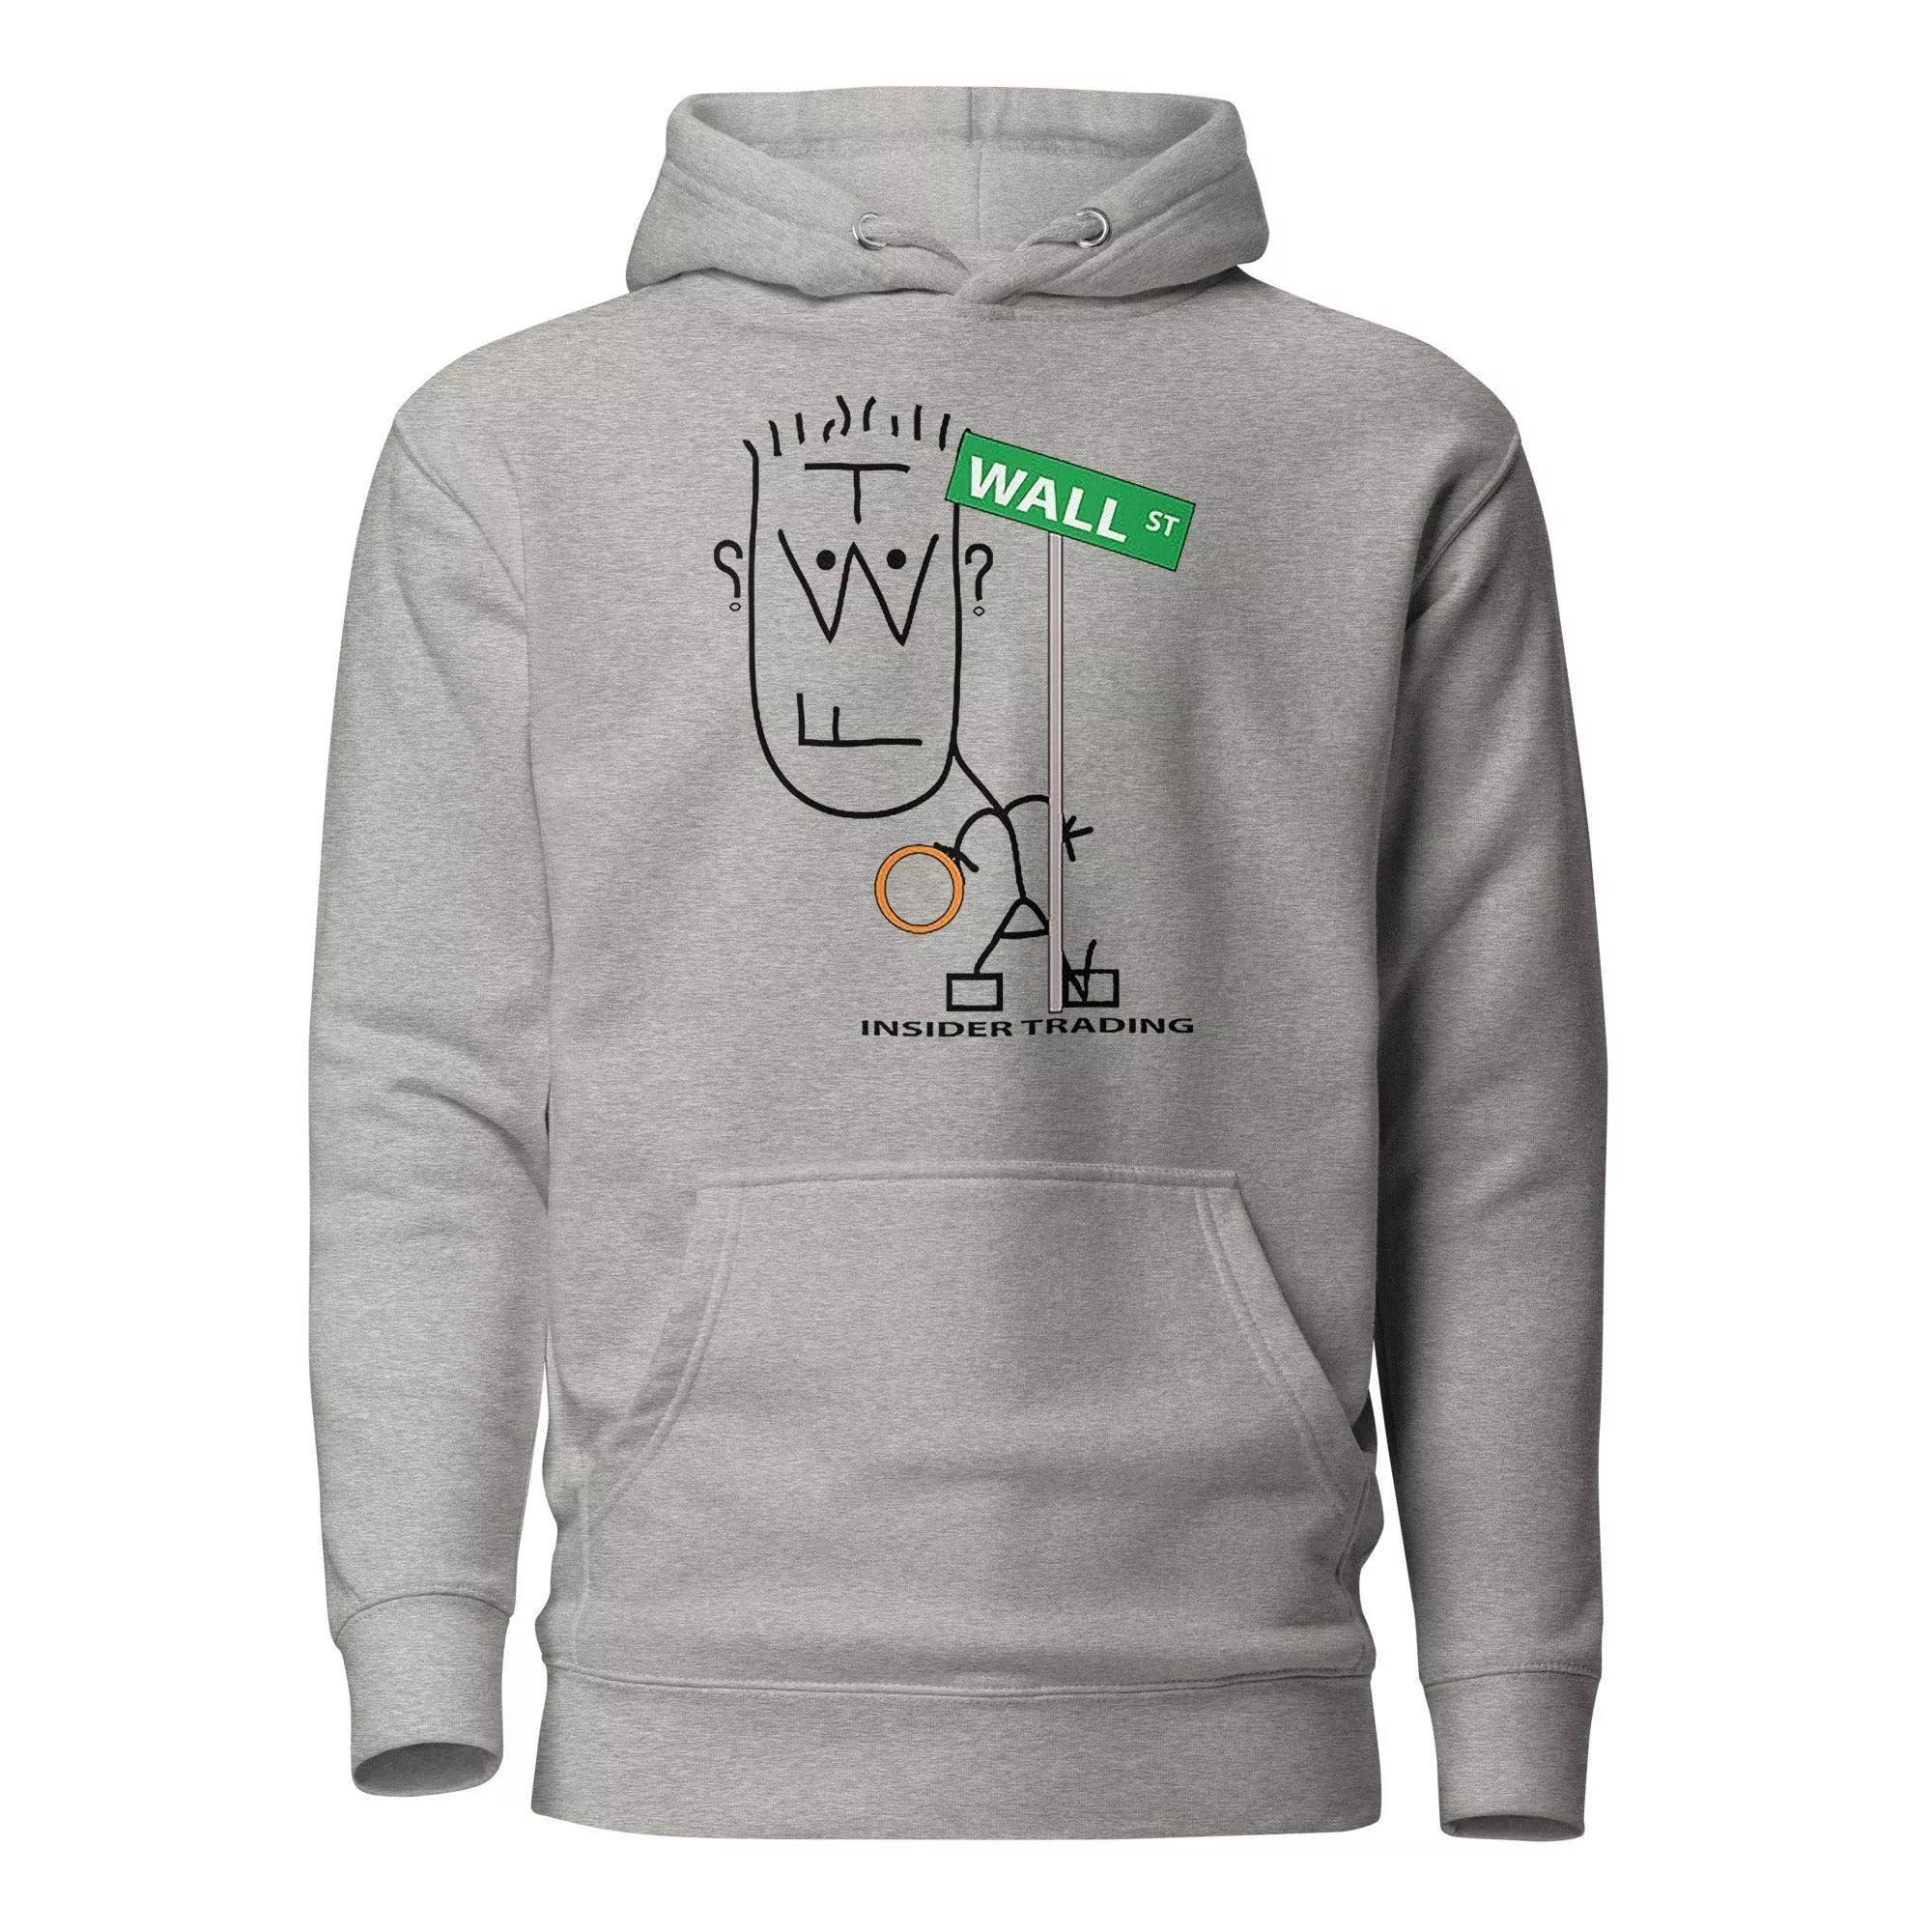 Wall Street Insider Trading Pullover Hoodie - InvestmenTees